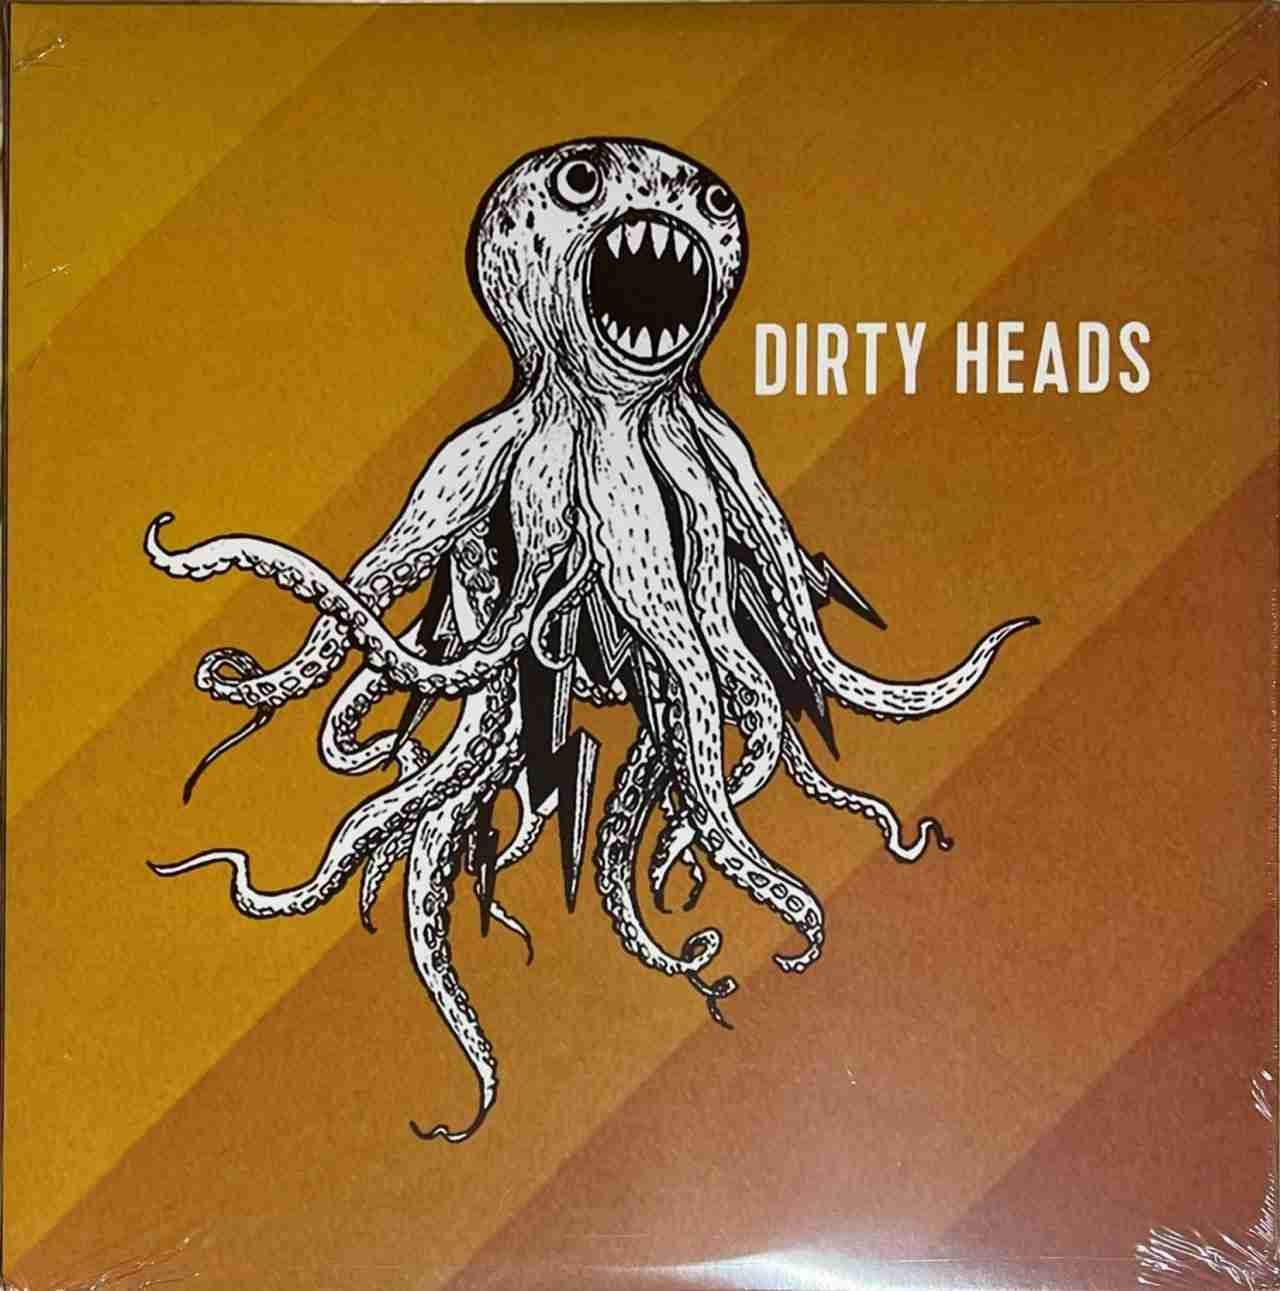 Dirty Heads Self-Titled Albums